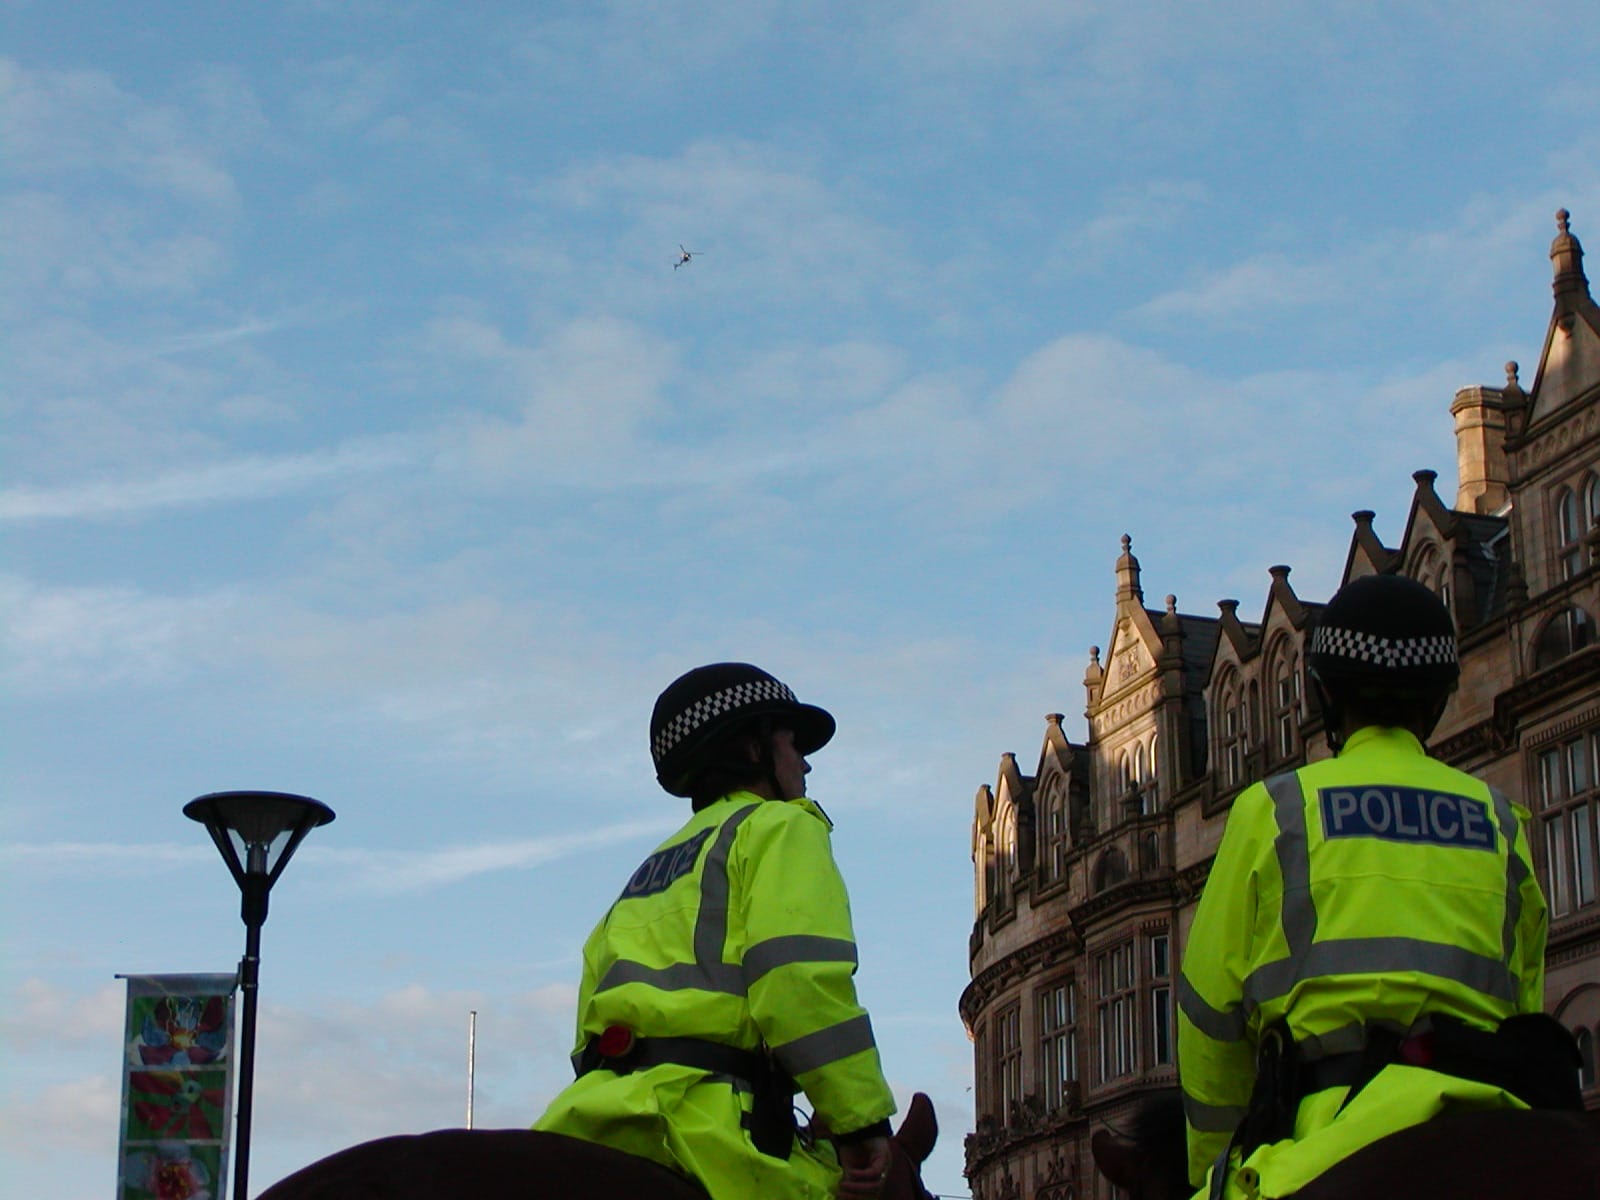 Two mounted police officers with old buildings in the background under a blue sky where a helicopter hovers